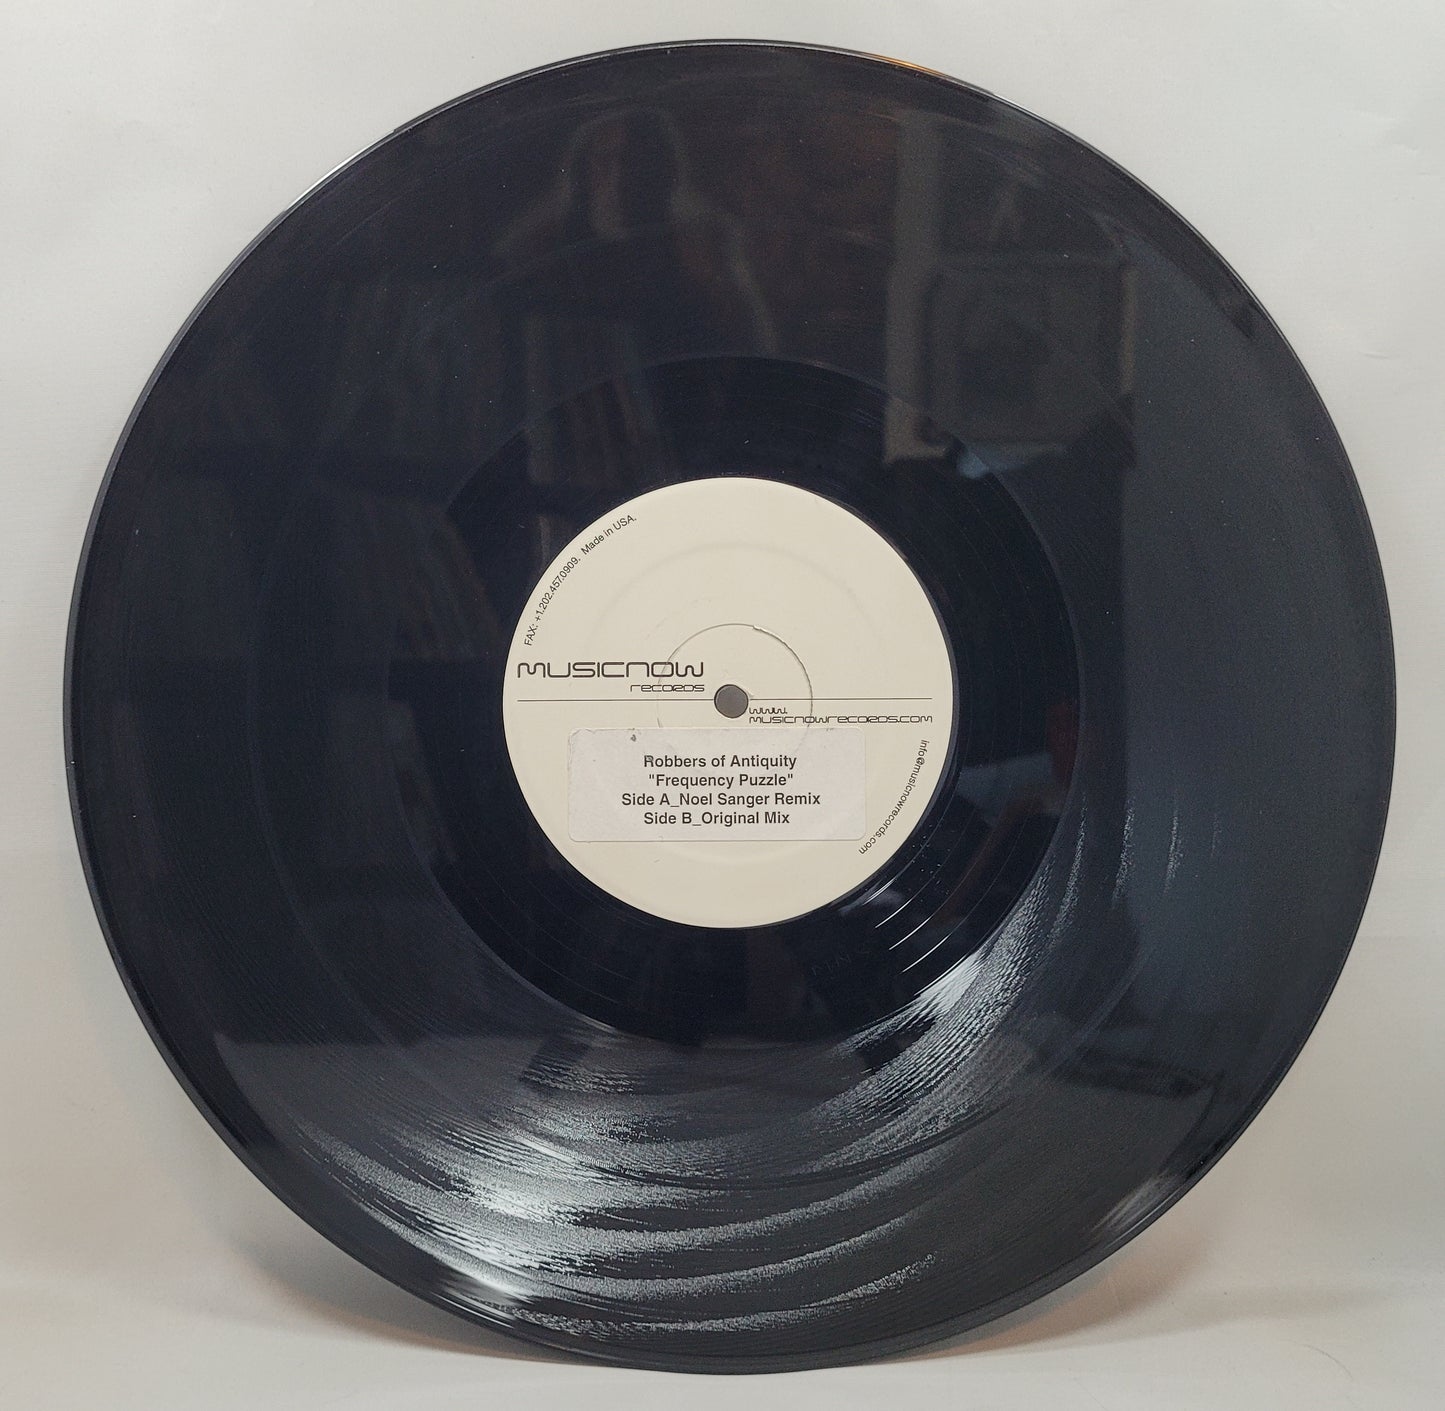 Robbers of Antiquity - Frequency Puzzle [Vinyl Record 12" Single]